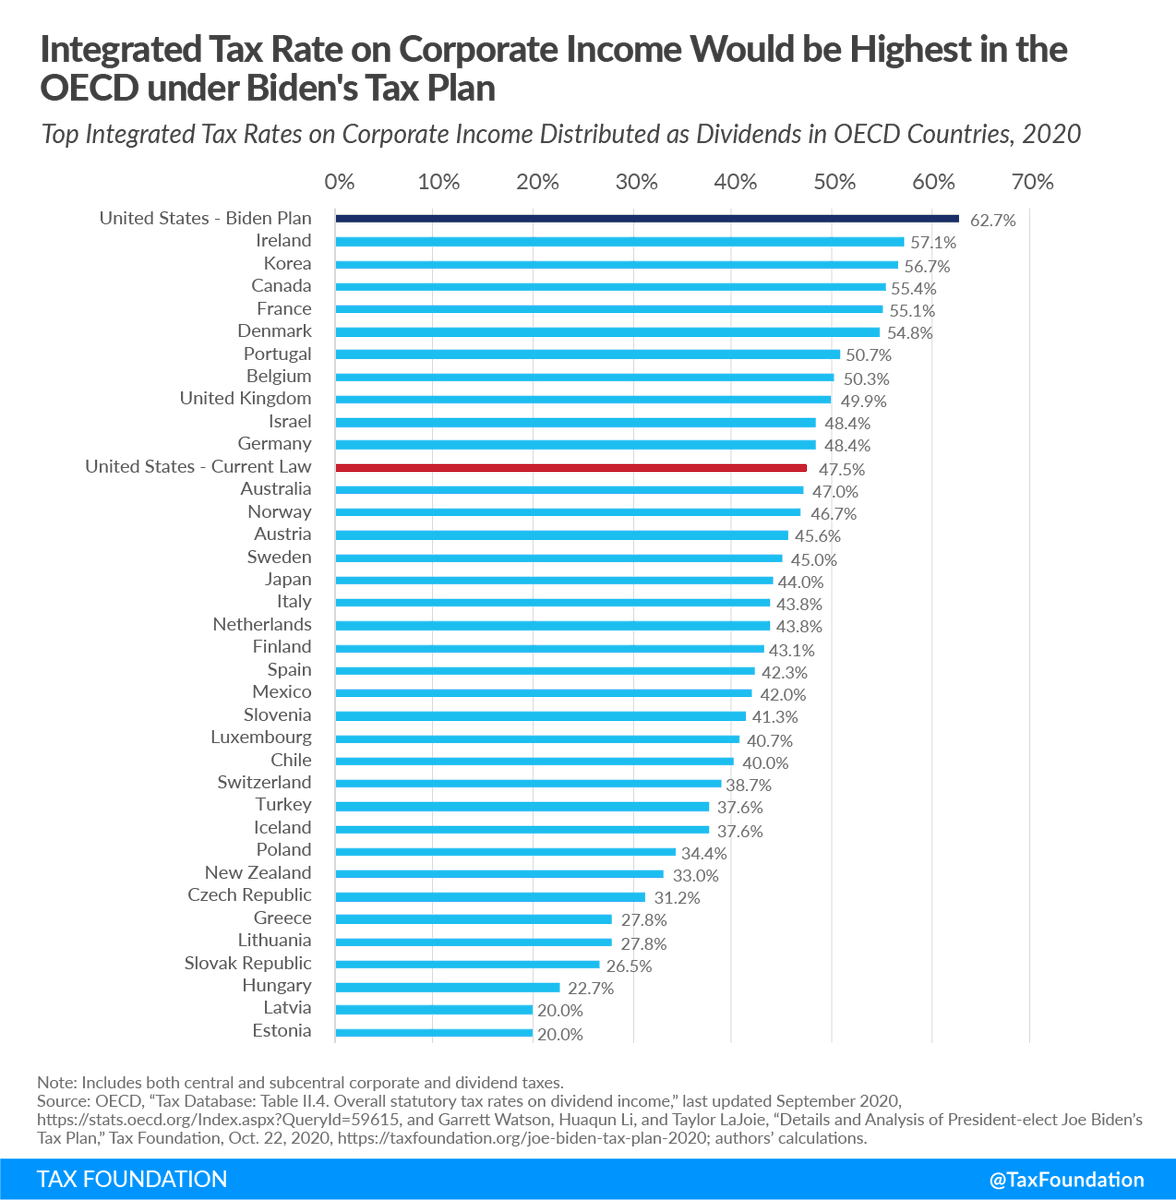 NEW: Double taxation of corporate income in the U.S. and the OECD:  https://buff.ly/3qjjzDU   @ElkeAsen